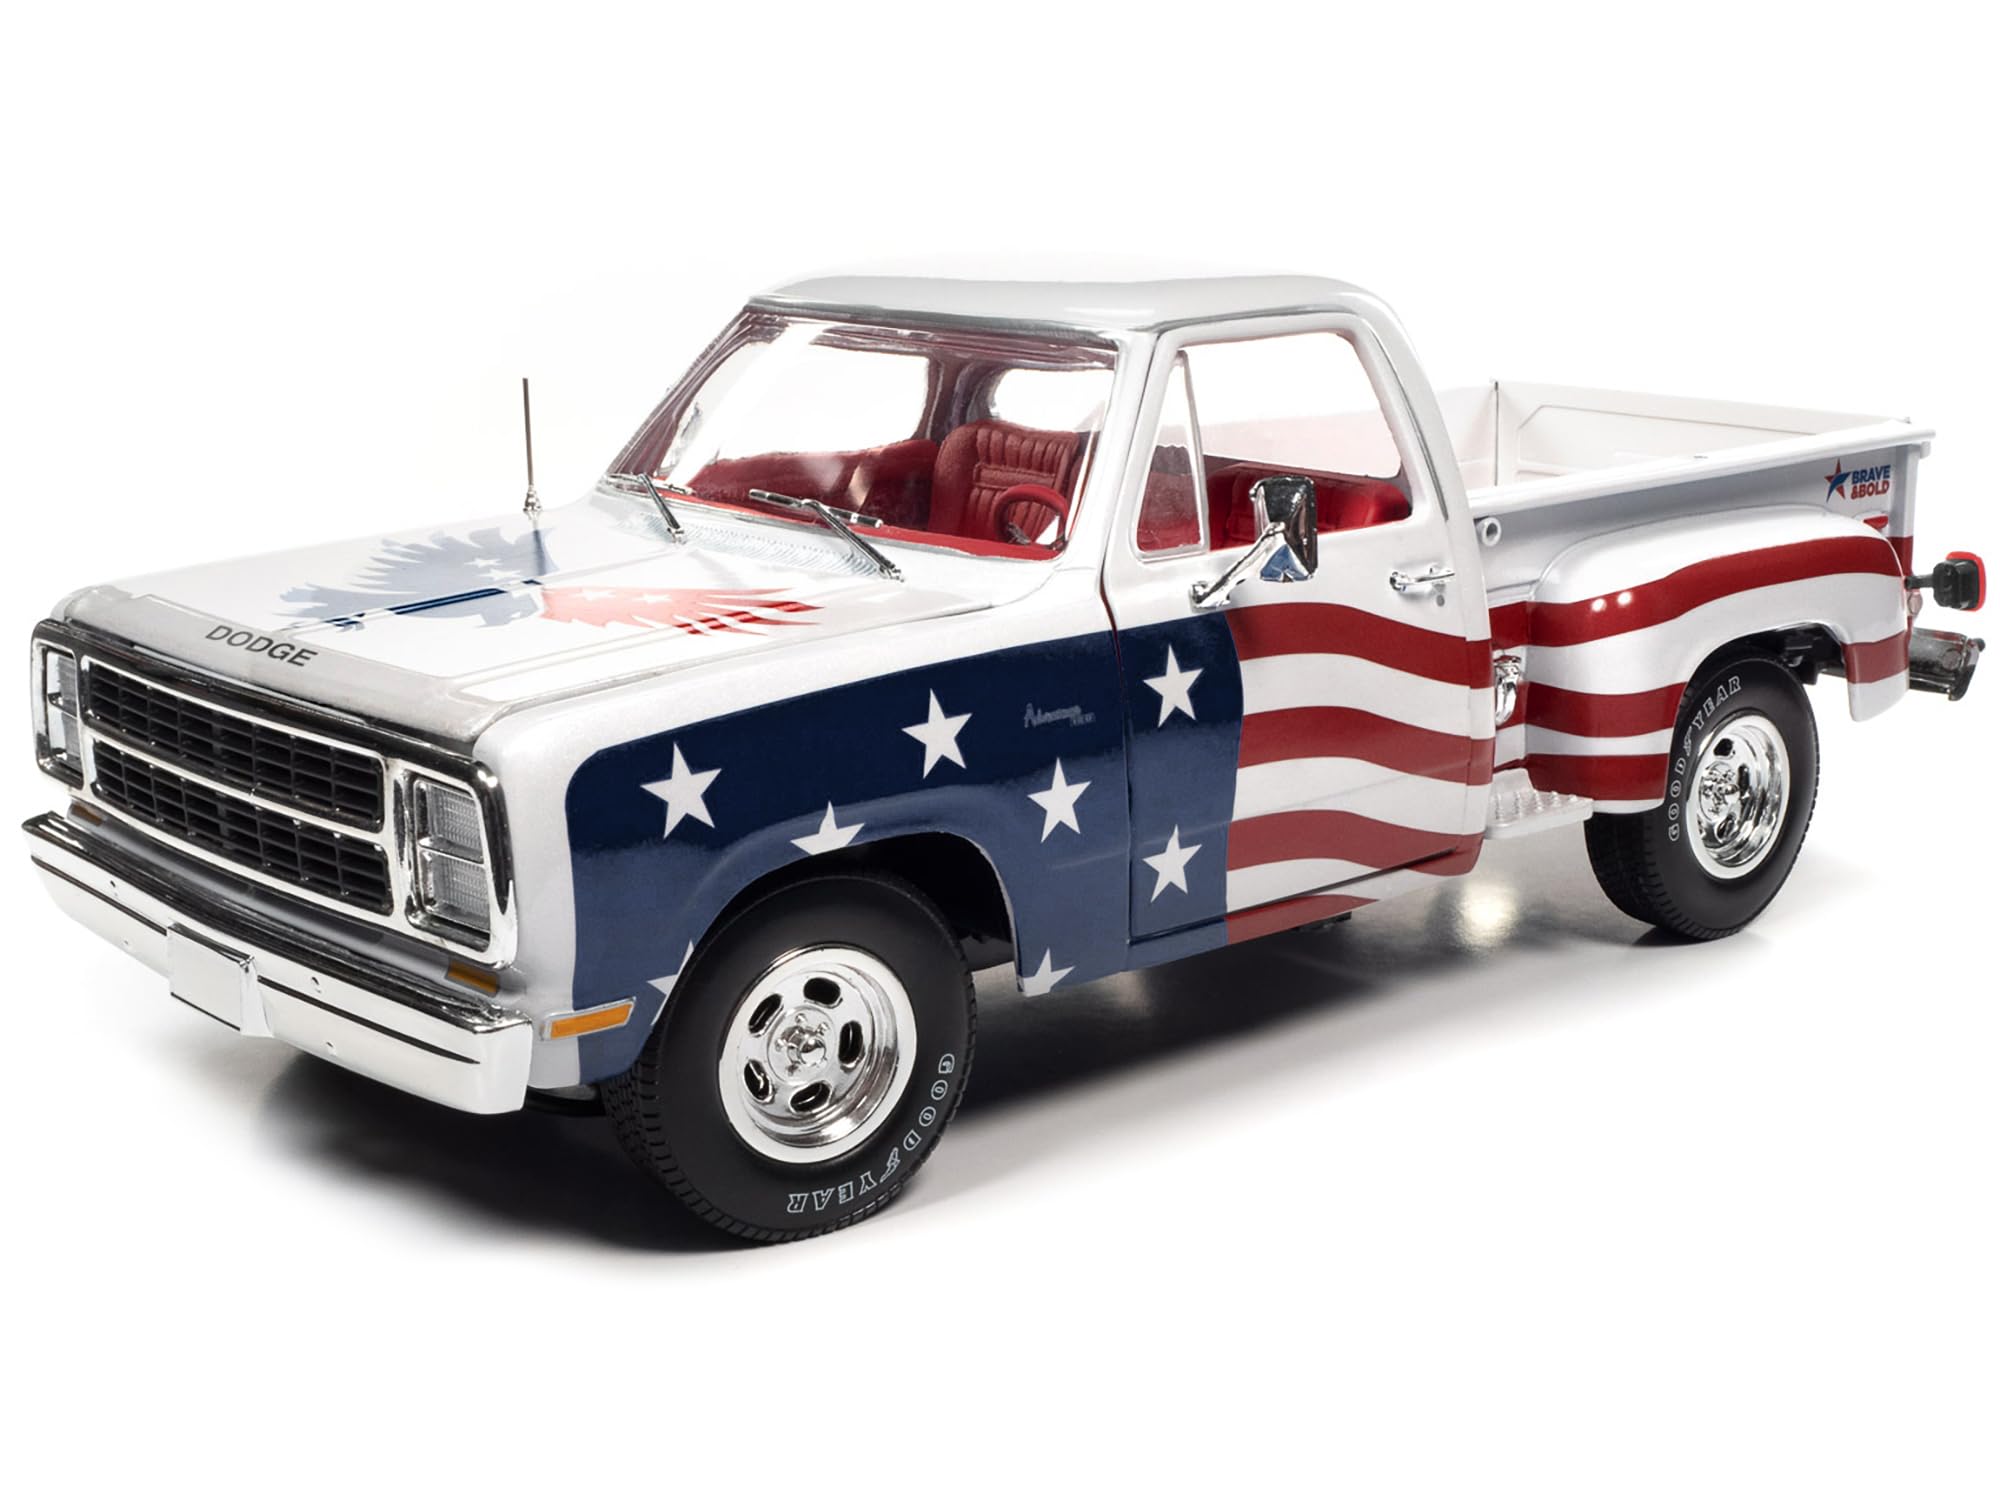 1980 D150 Adventurer Pickup Truck White with American Flag Graphics and Red Interior 118 Diecast Model Car by Auto World AW3